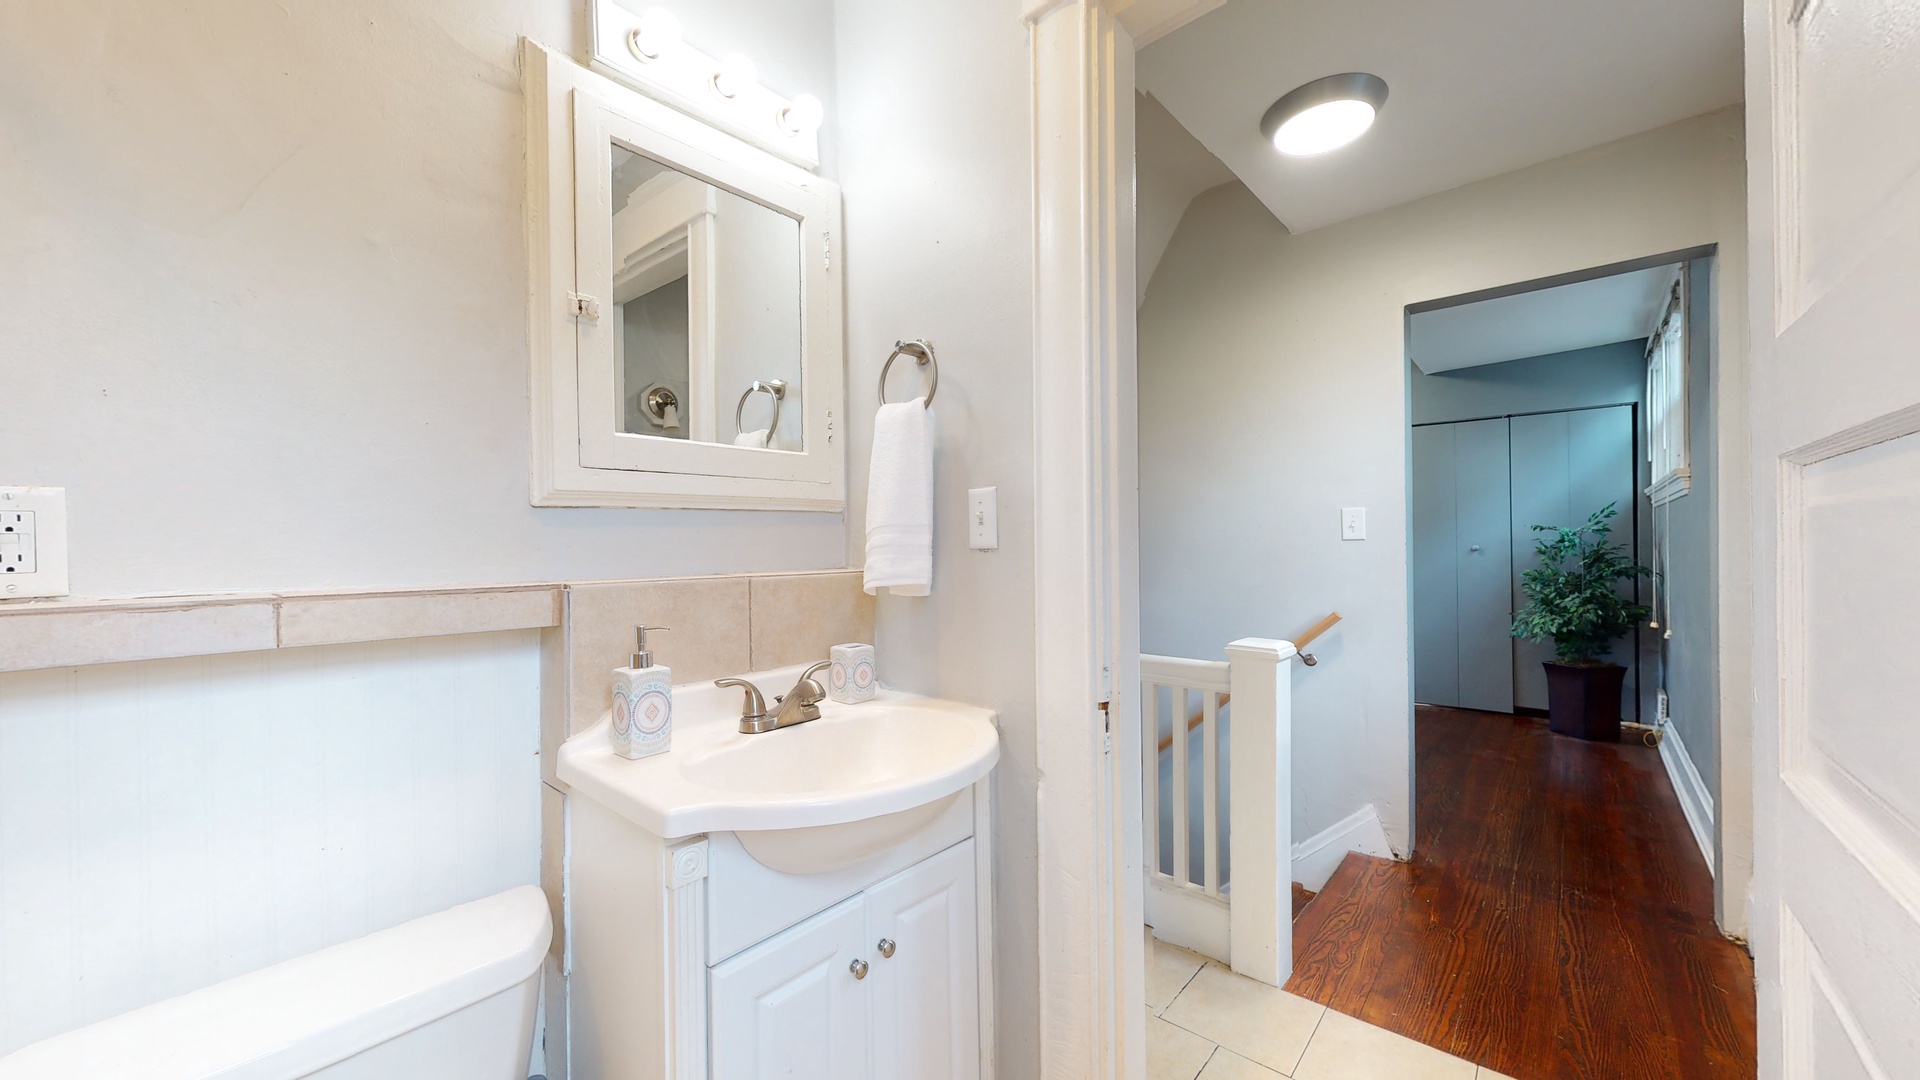 The full bath features a single vanity, mirror storage, & shower/tub combo